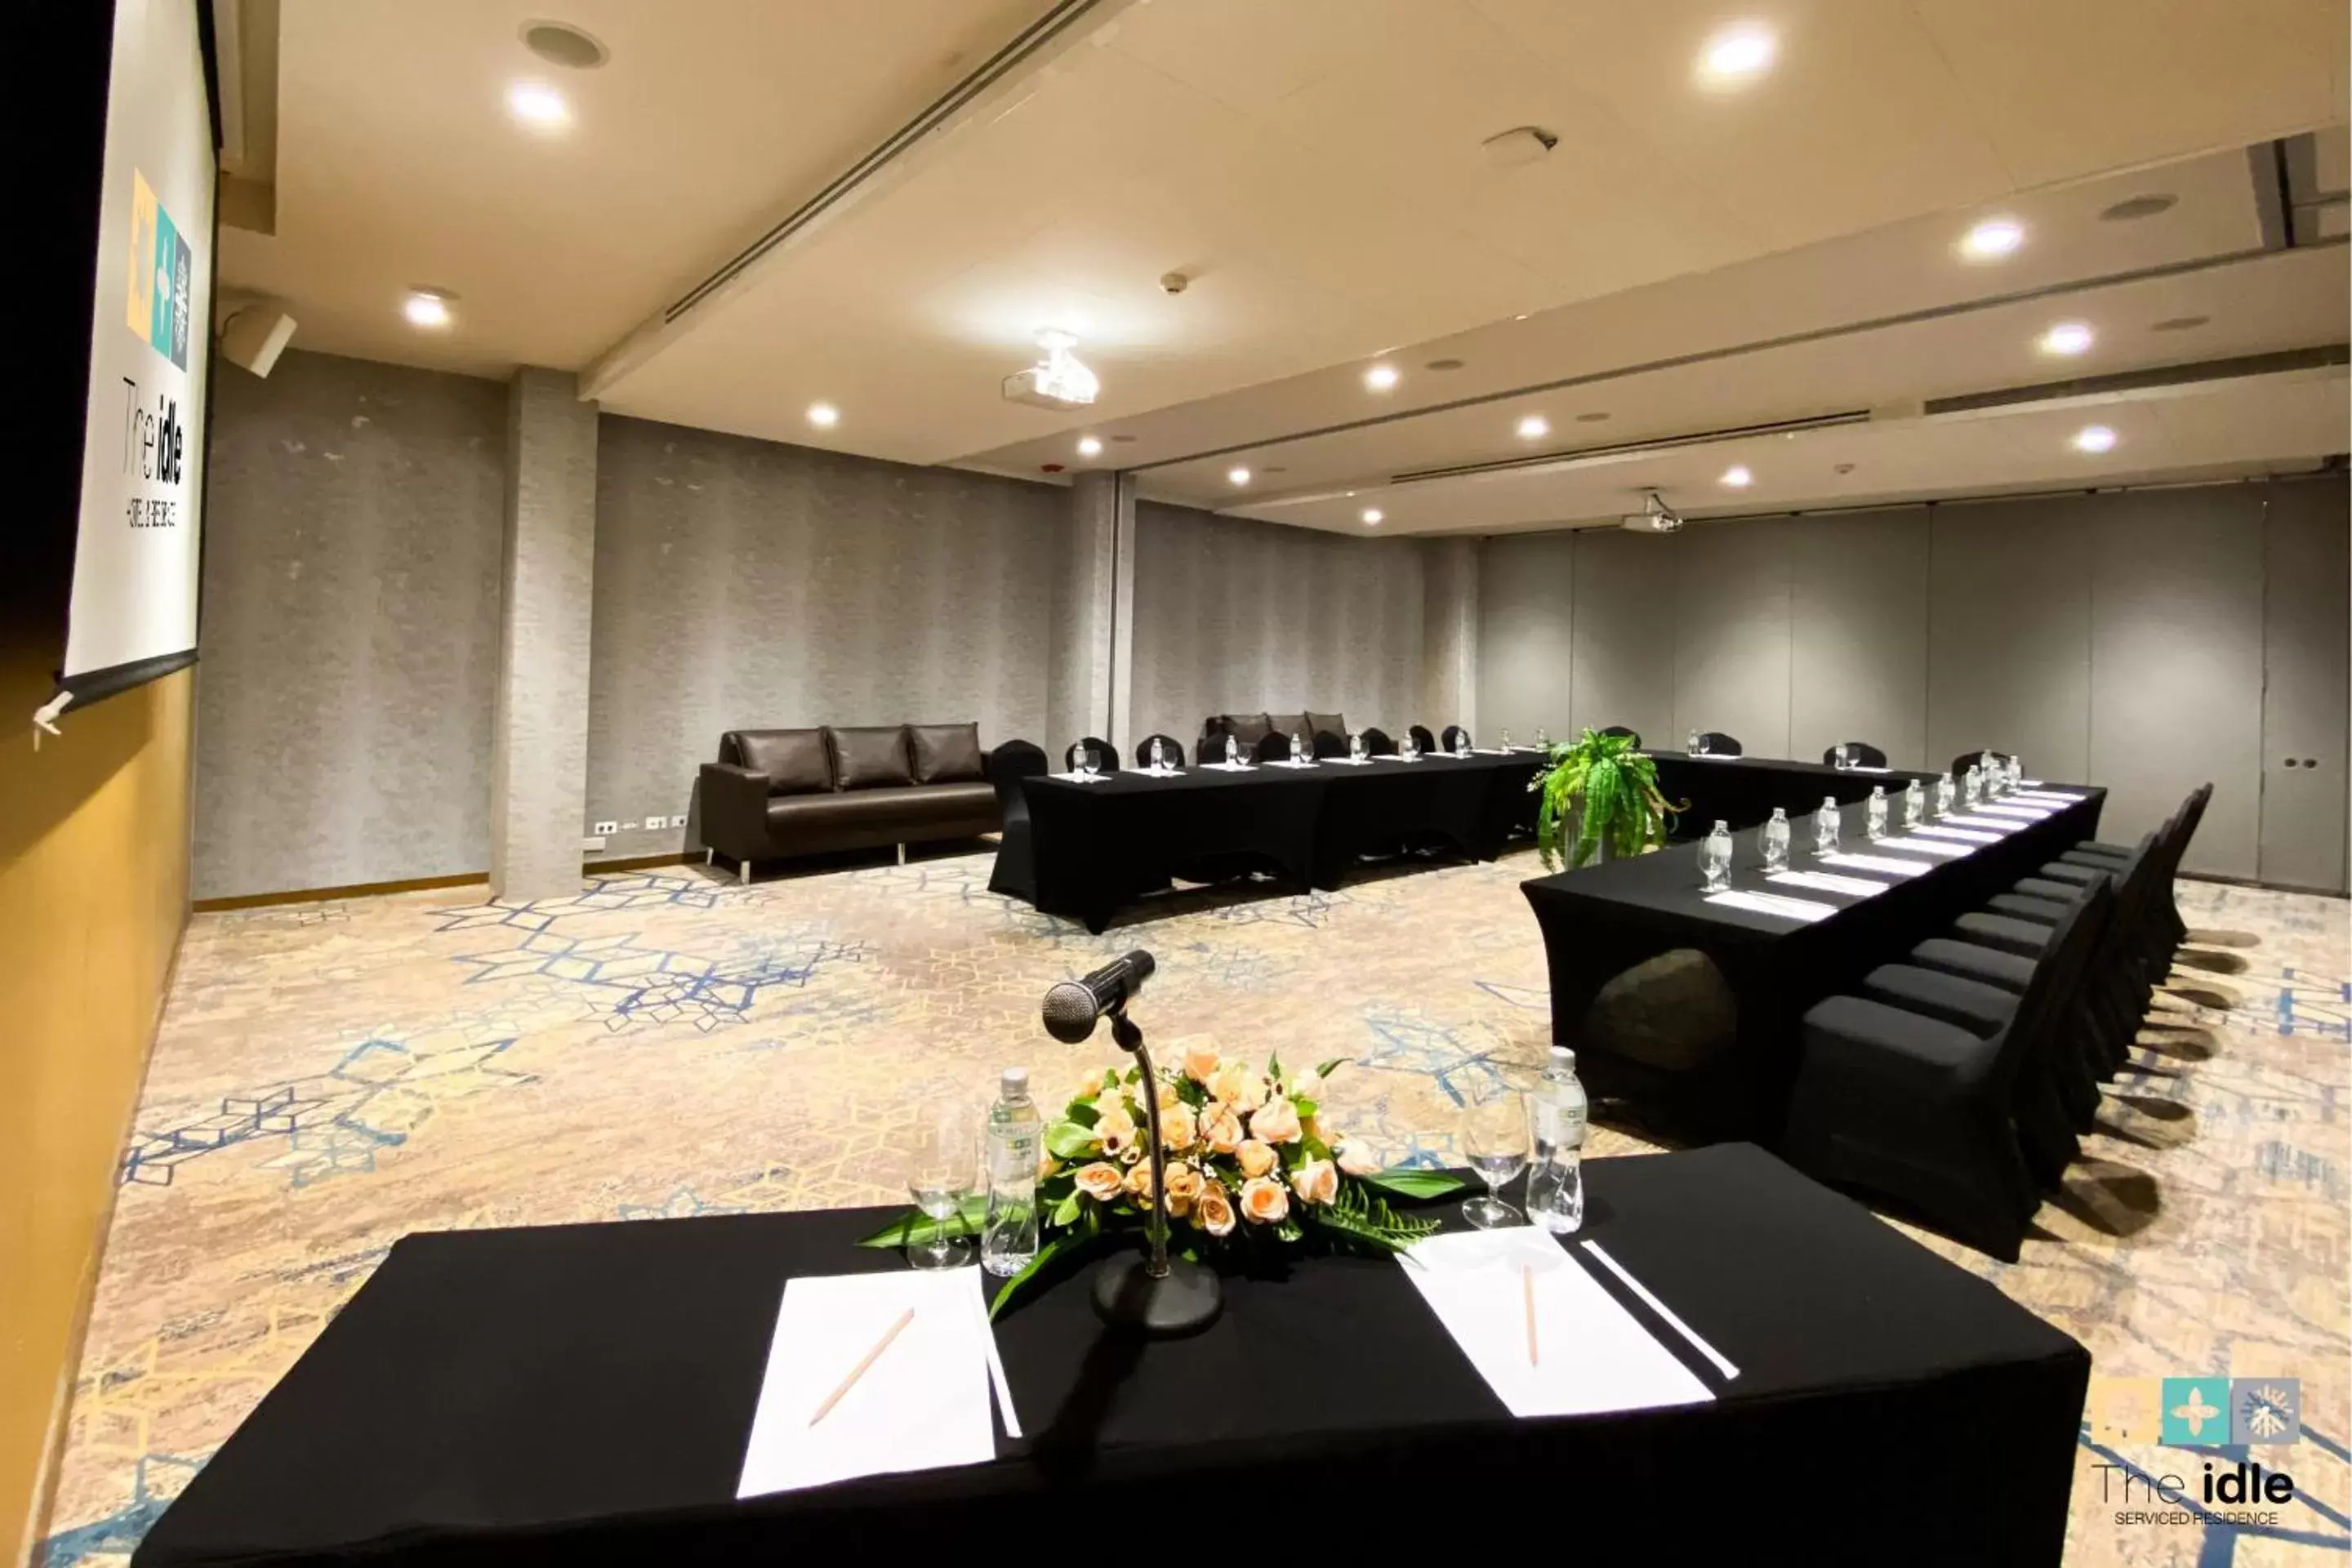 Meeting/conference room, Business Area/Conference Room in The Idle Hotel and Residence - SHA Plus Certified